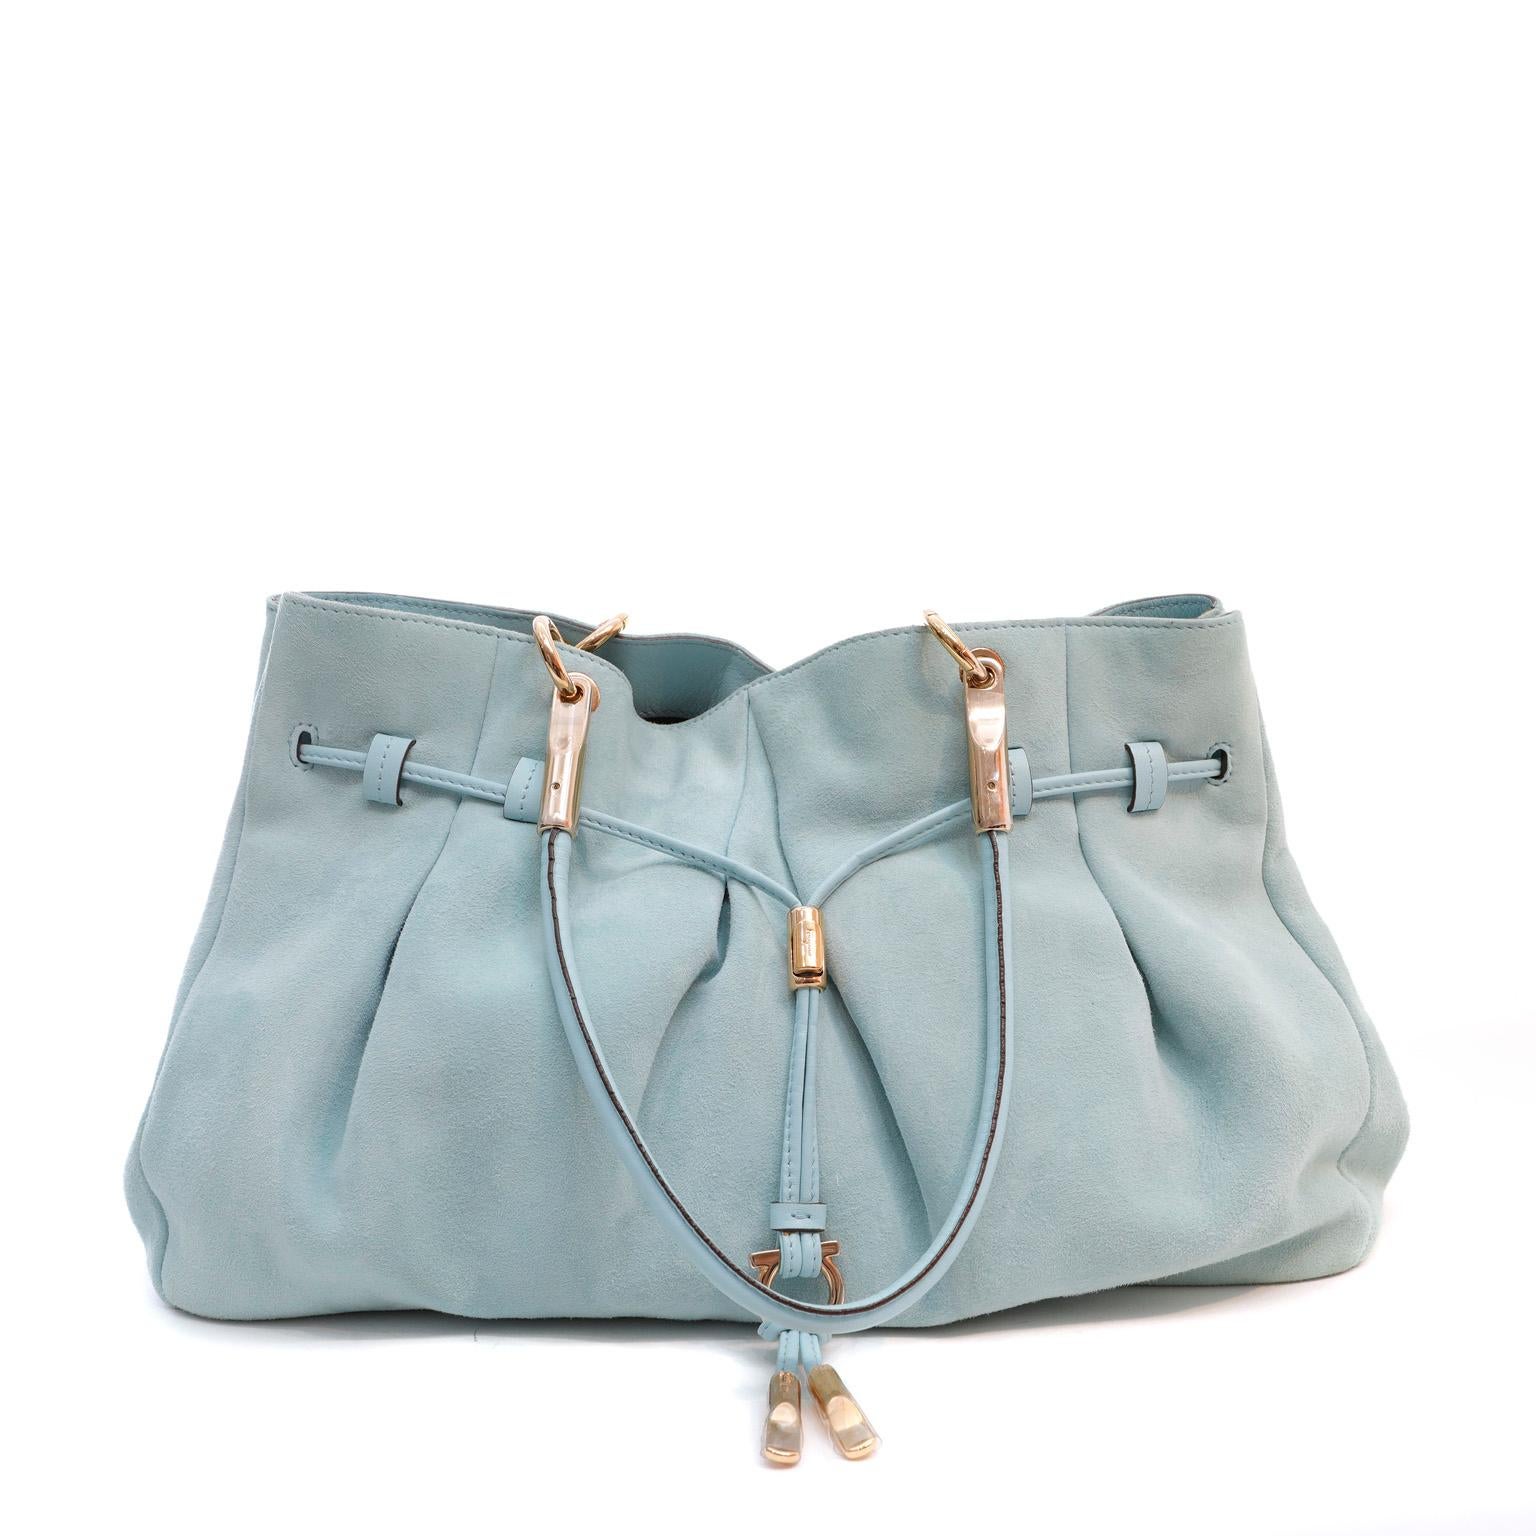 This authentic Salvatore Ferragamo Light Blue Suede Hobo is in excellent condition.  Robin’s egg blue supple suede hobo with feminine pleated details and gold tone Gancini hardware. 

PBF 13417